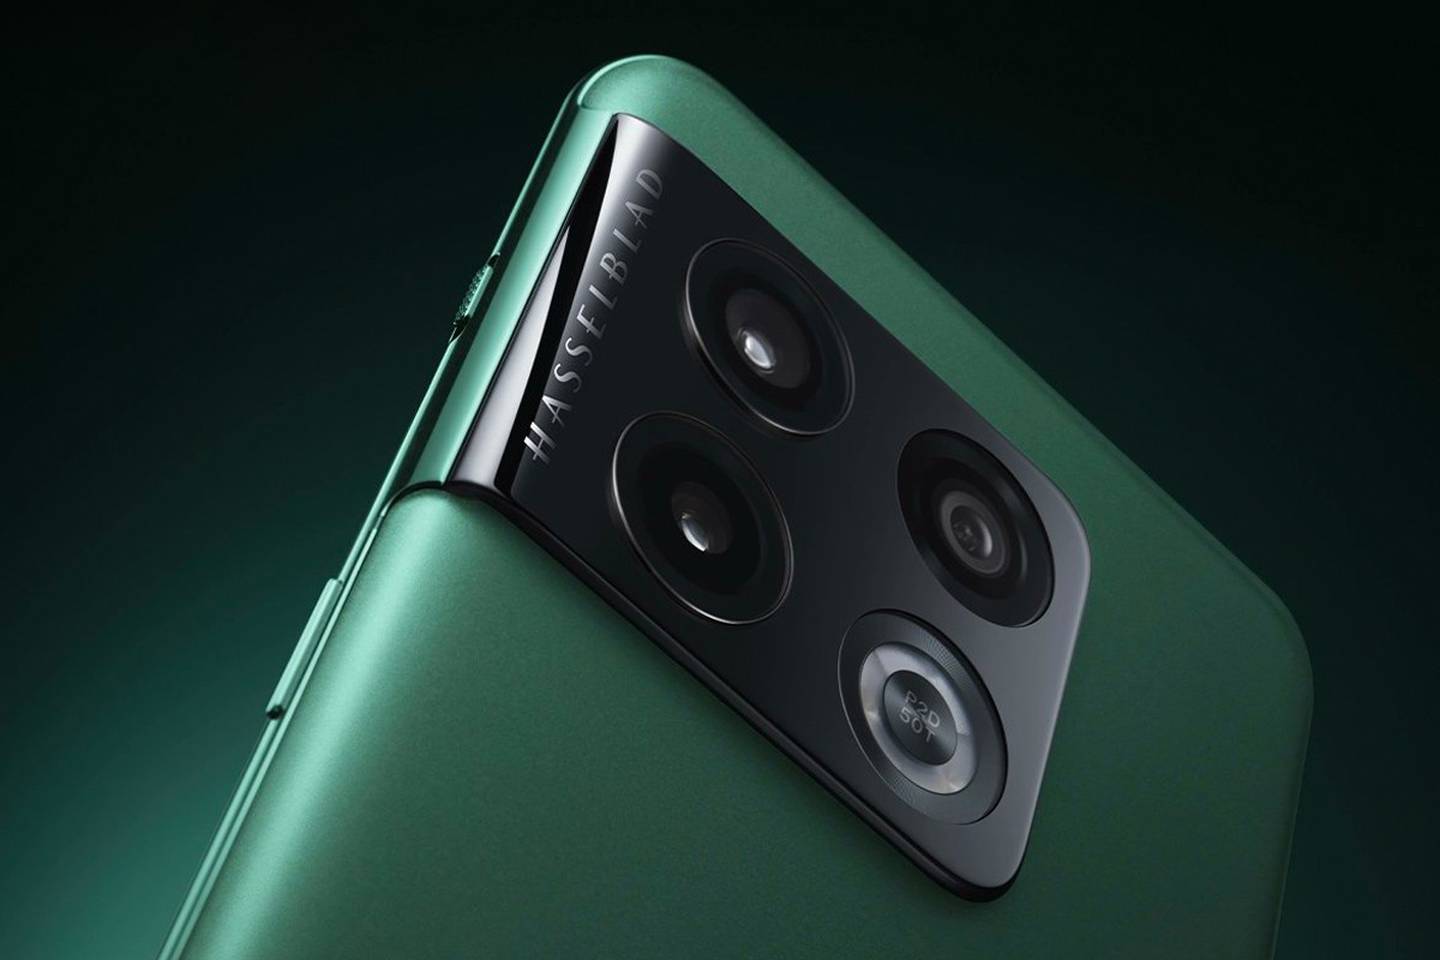 The OnePlus 10 Pro's camera, which comes with a 48MP lead sensor, is co-developed with Sweden's Hasselblad. Photo: OnePlus